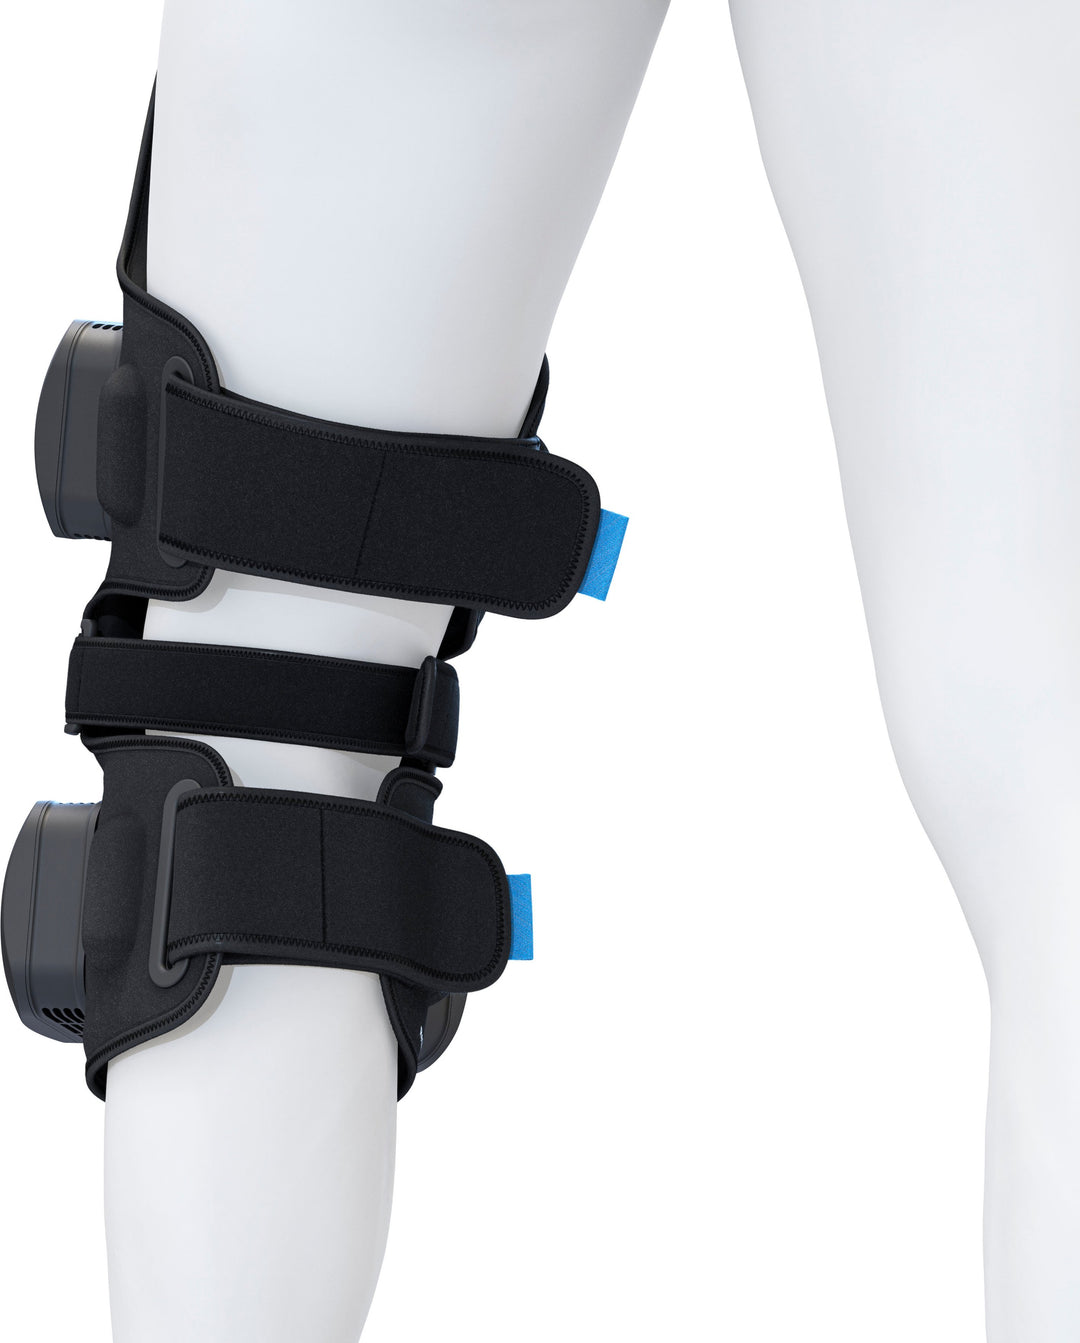 Therabody - RecoveryTherm Hot & Cold Wrap - Knee - Black_7